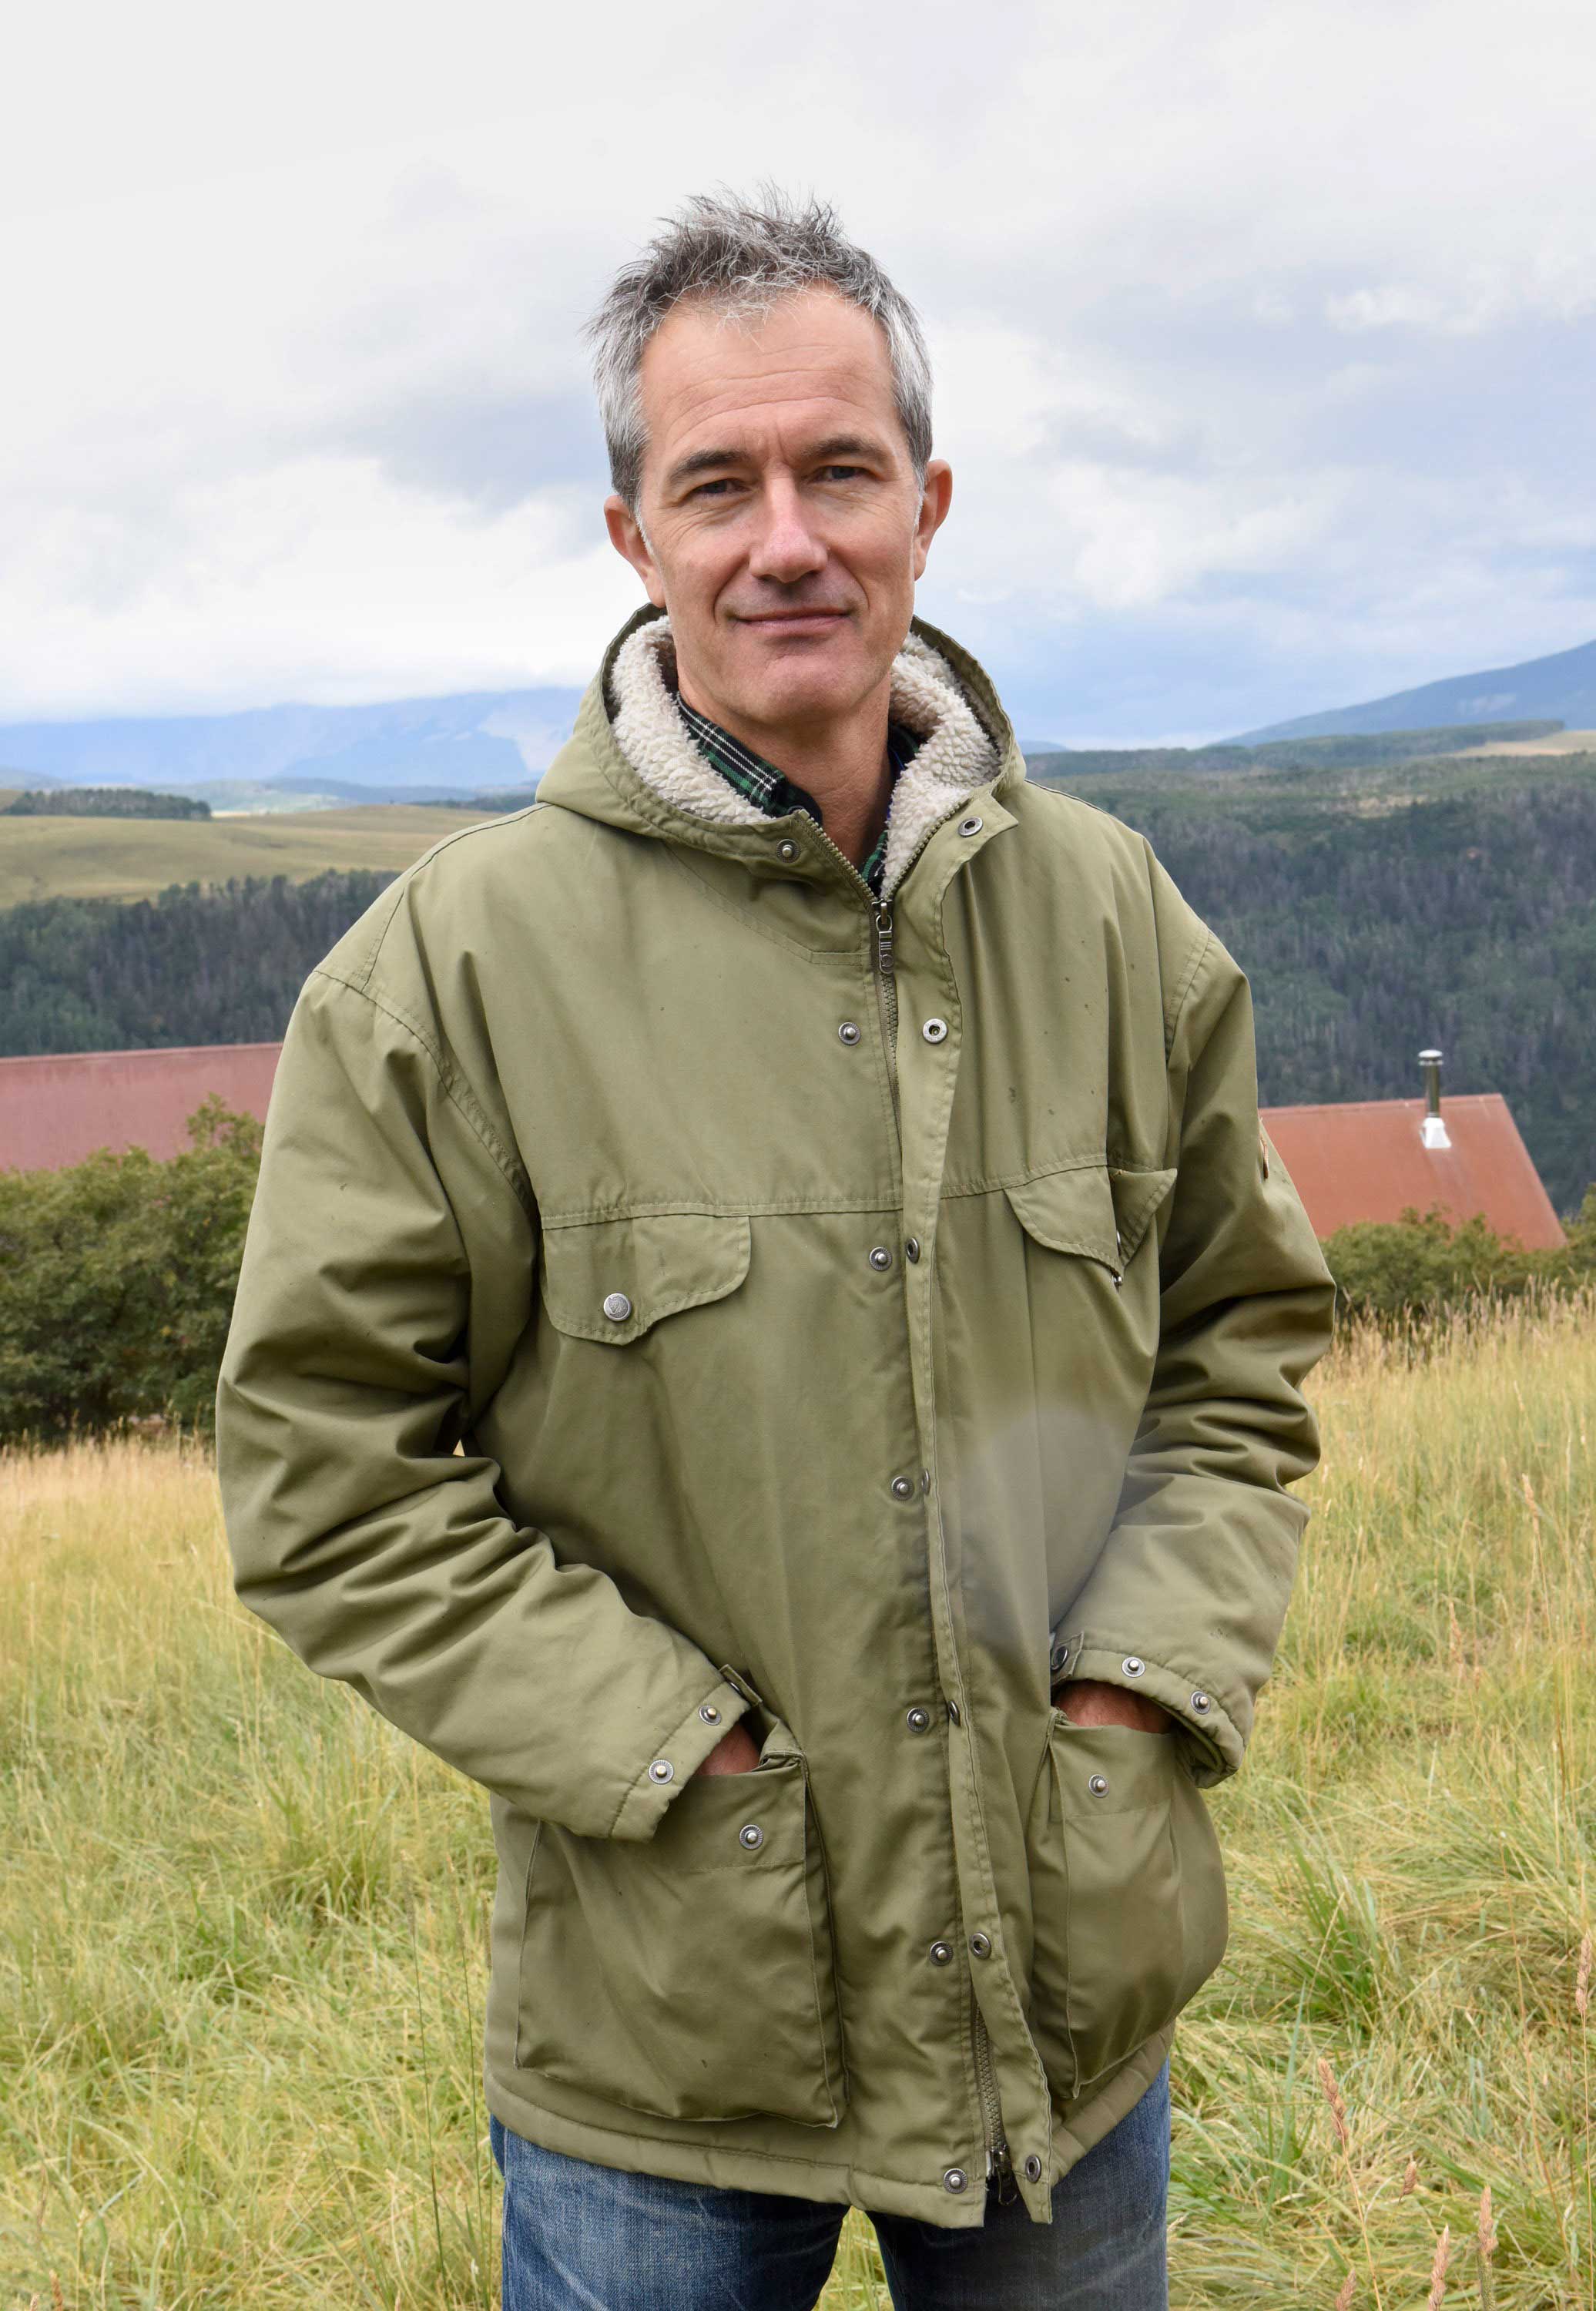 The writer Geoff Dyer finds trouble in paradise (Vivien Killilea—Getty Images)